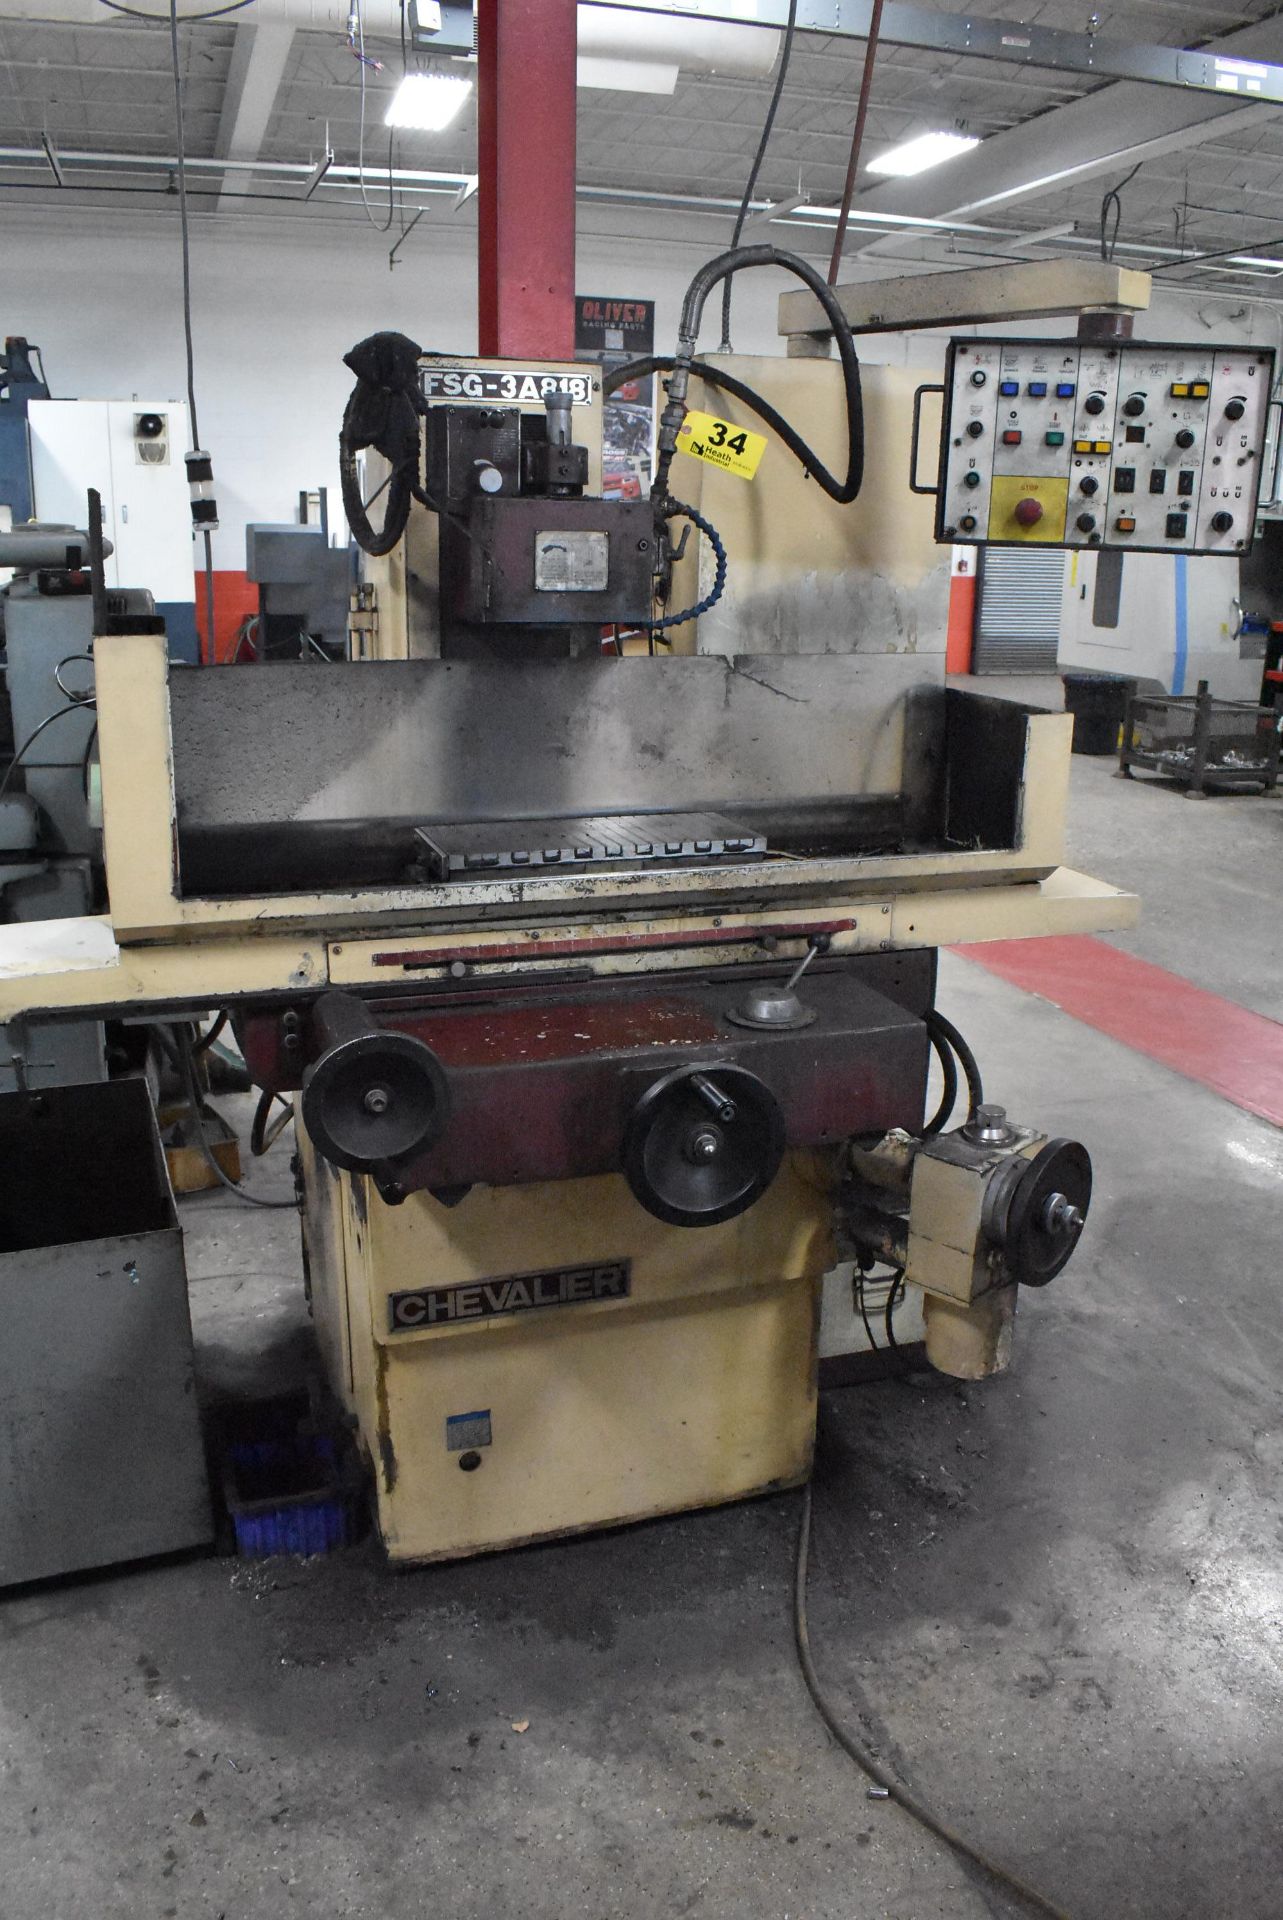 CHEVALIERÂ 8" x 18" MODEL FSG-3A818 HYDRAULIC SURFACE GRINDER, S/N M3841007, WITH ELECTRO MAGNETIC - Image 5 of 11